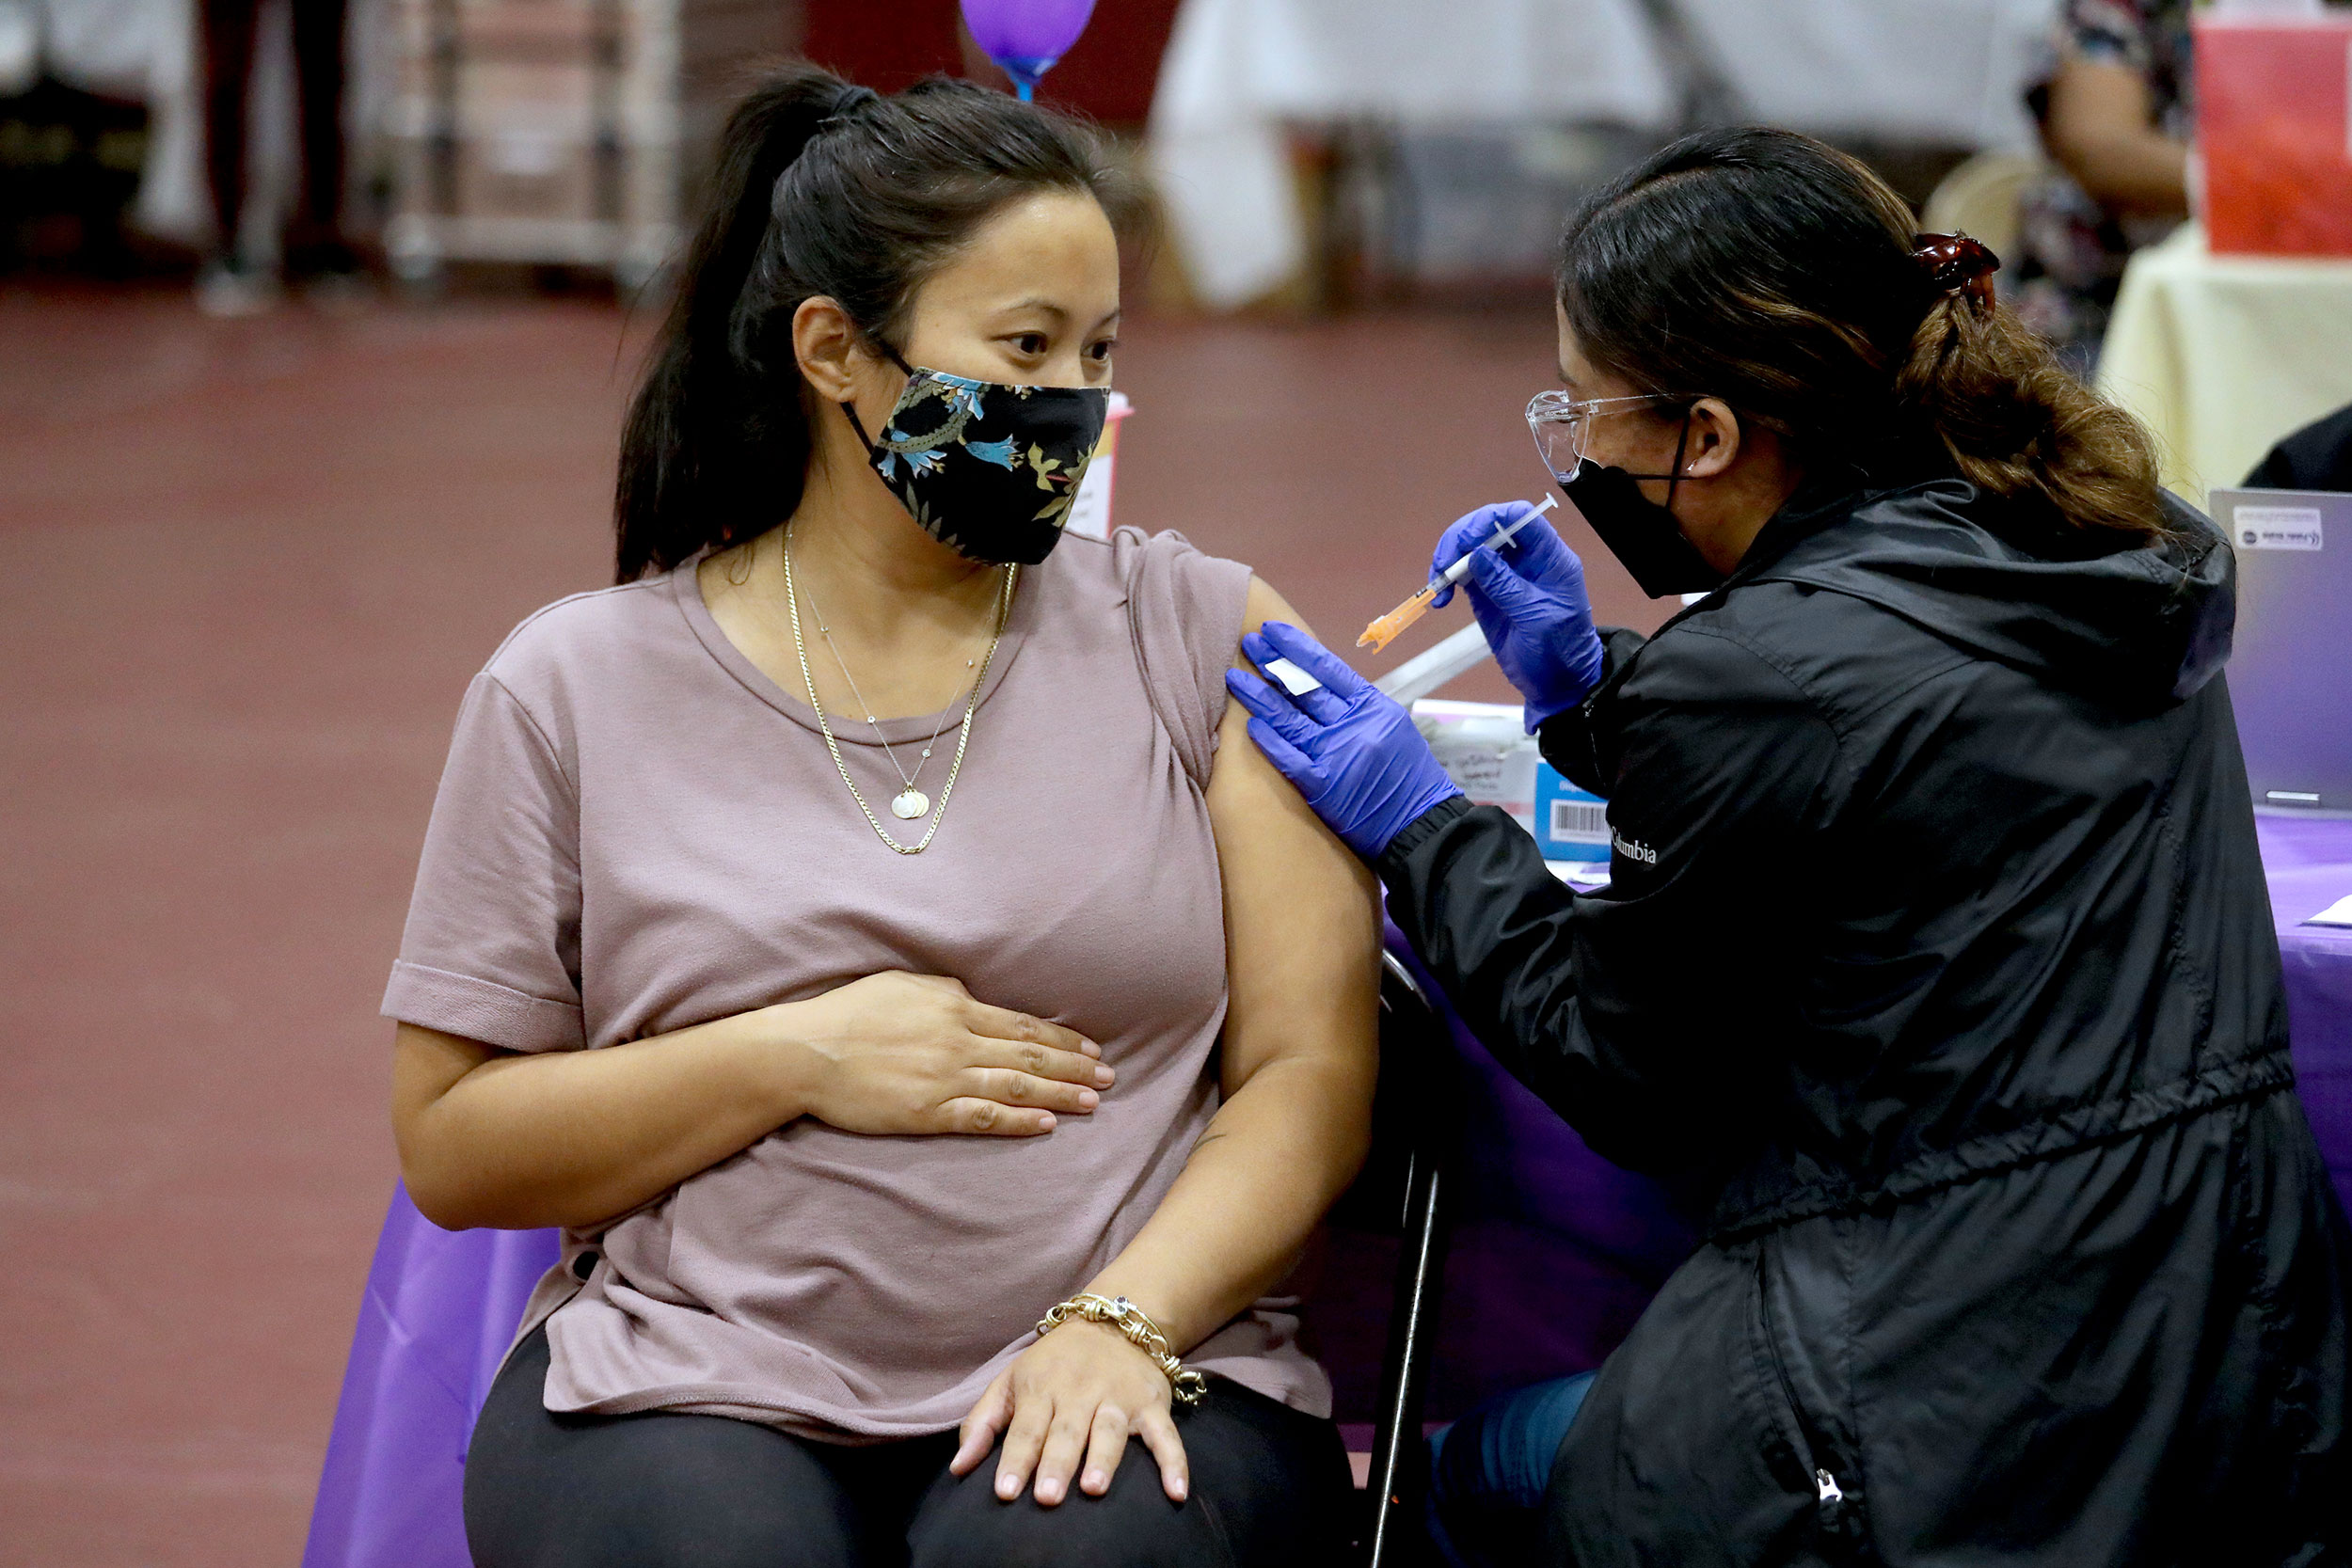 Nicole Fahey receives a booster dose of a Covid-19 vaccine in Los Angeles, California, on November 3.